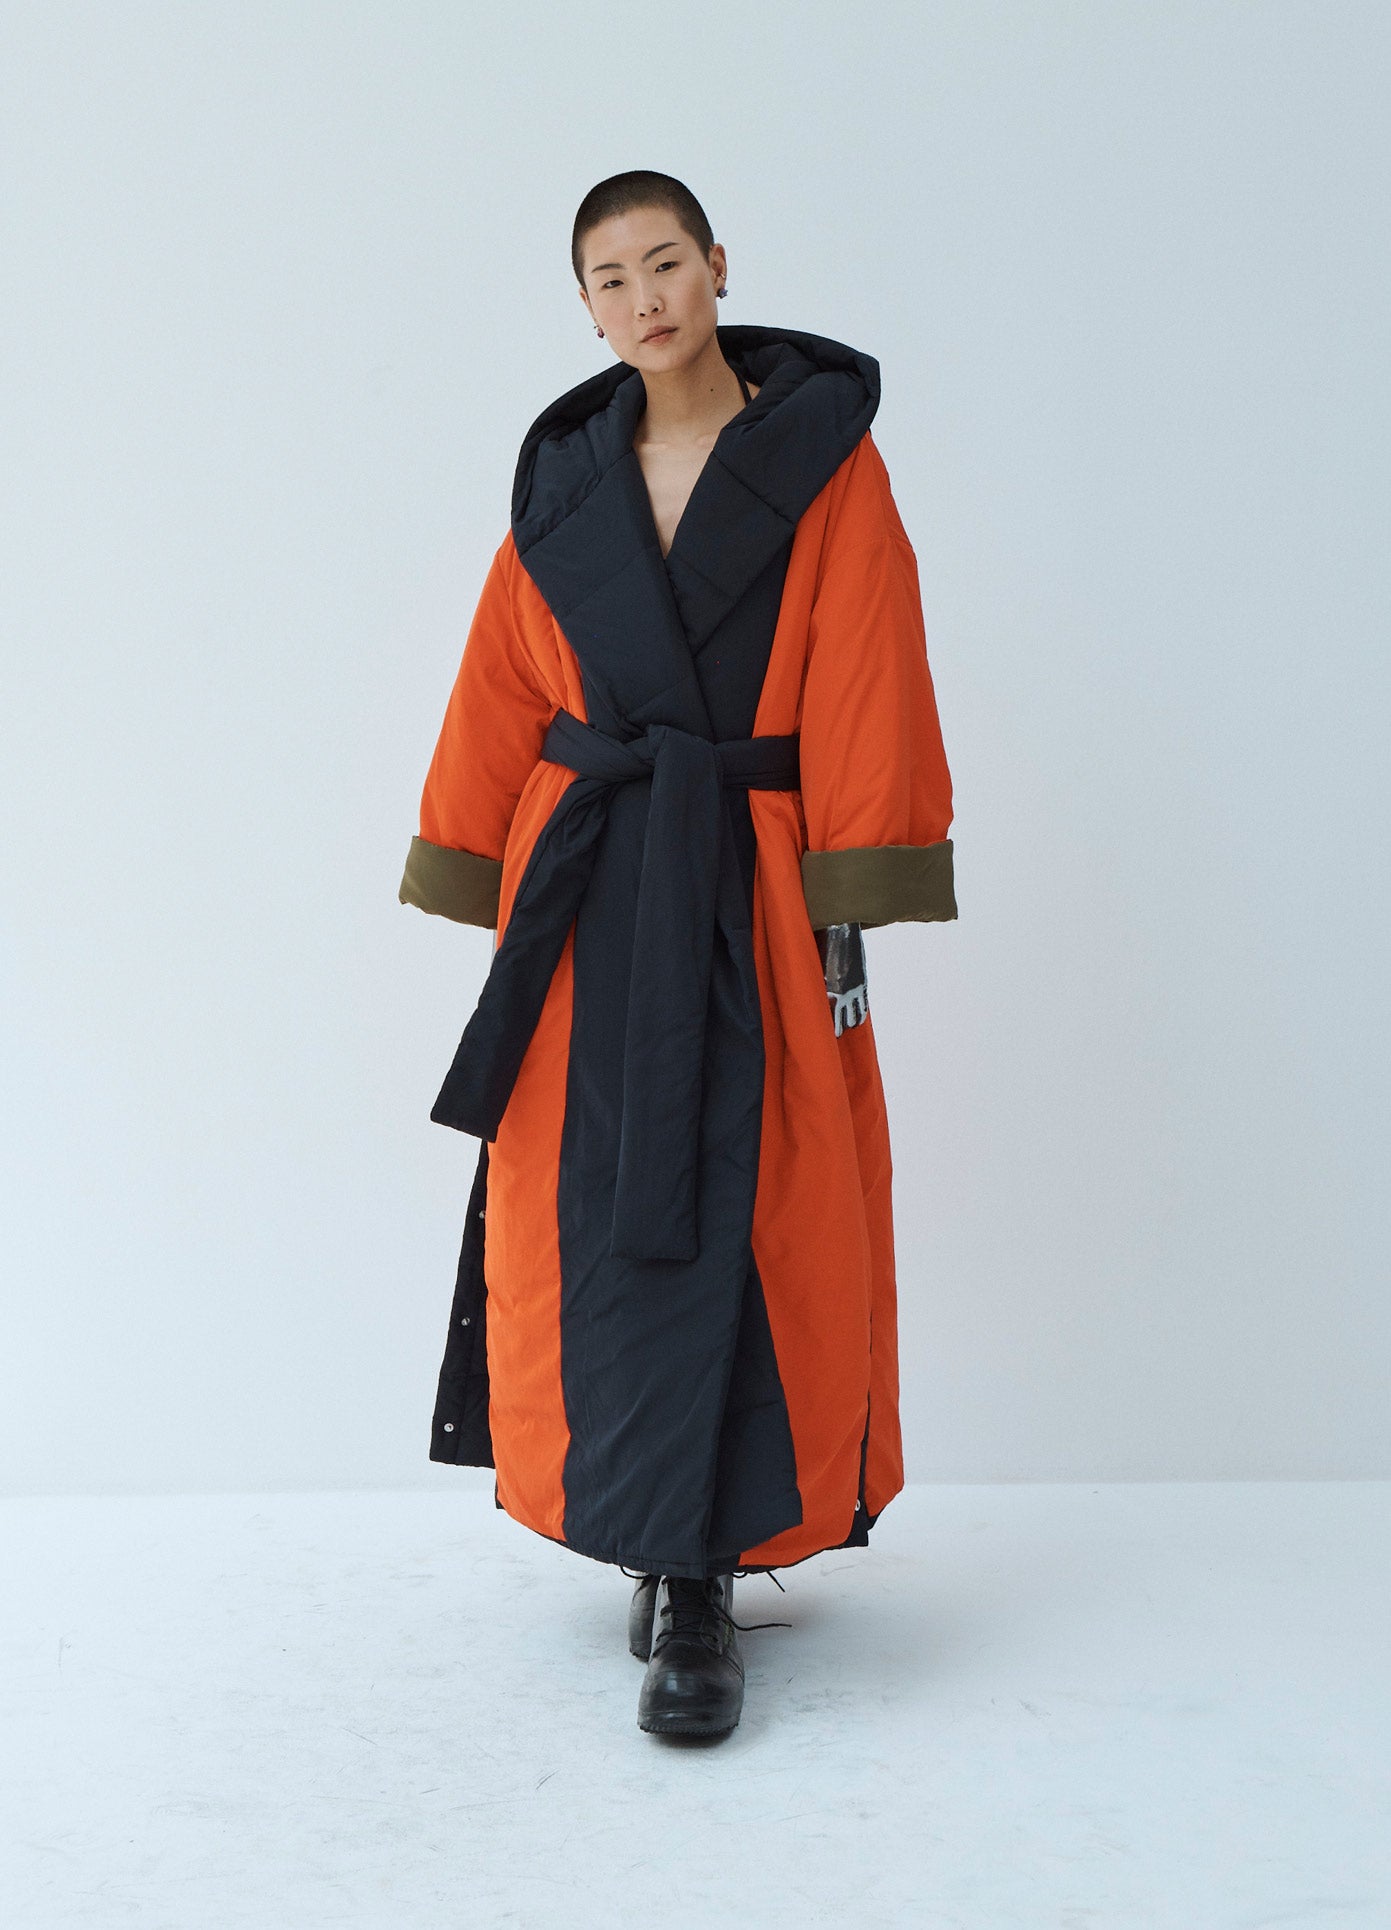 MONSE Techno Puffer Robe in Bright Orange on Model Front View